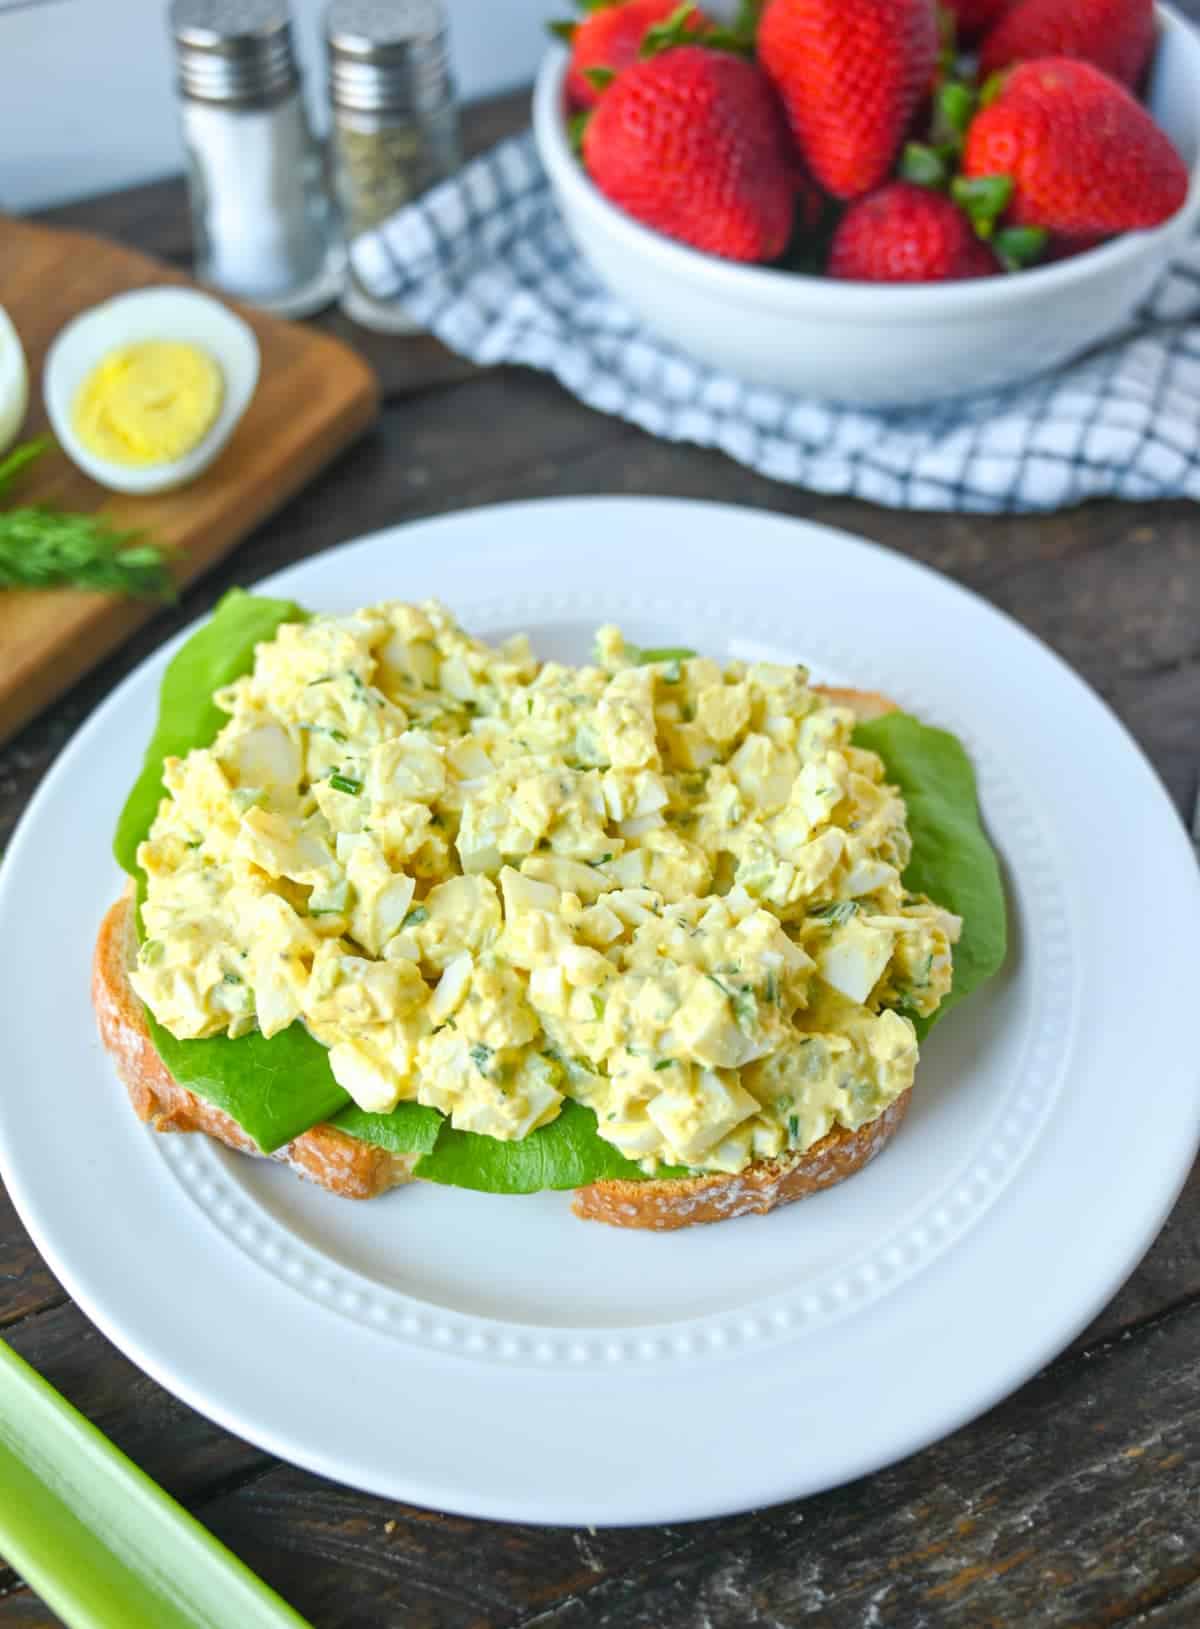 Egg salad spread over lettuse and a slice of bread.